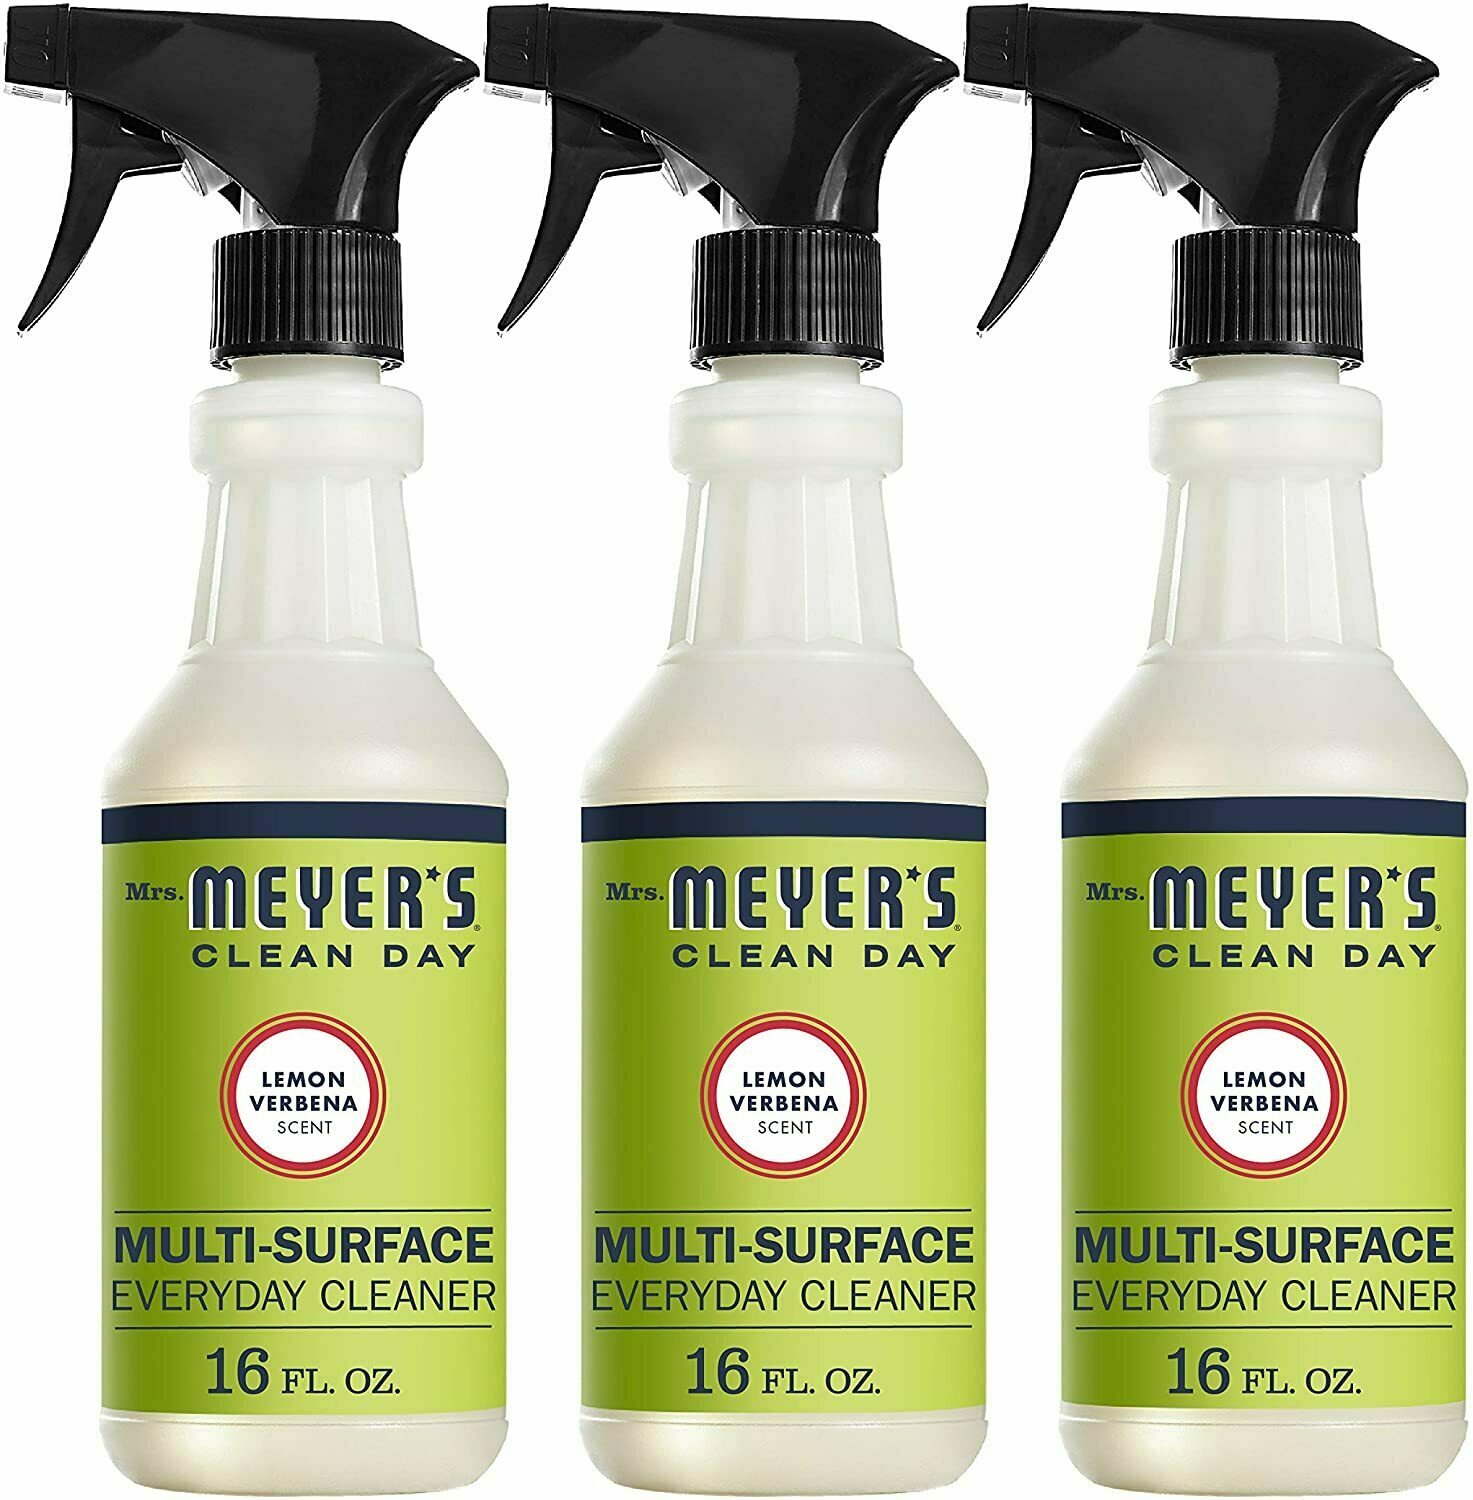 Mrs. Meyers Multi-Surface Everyday Cleaner